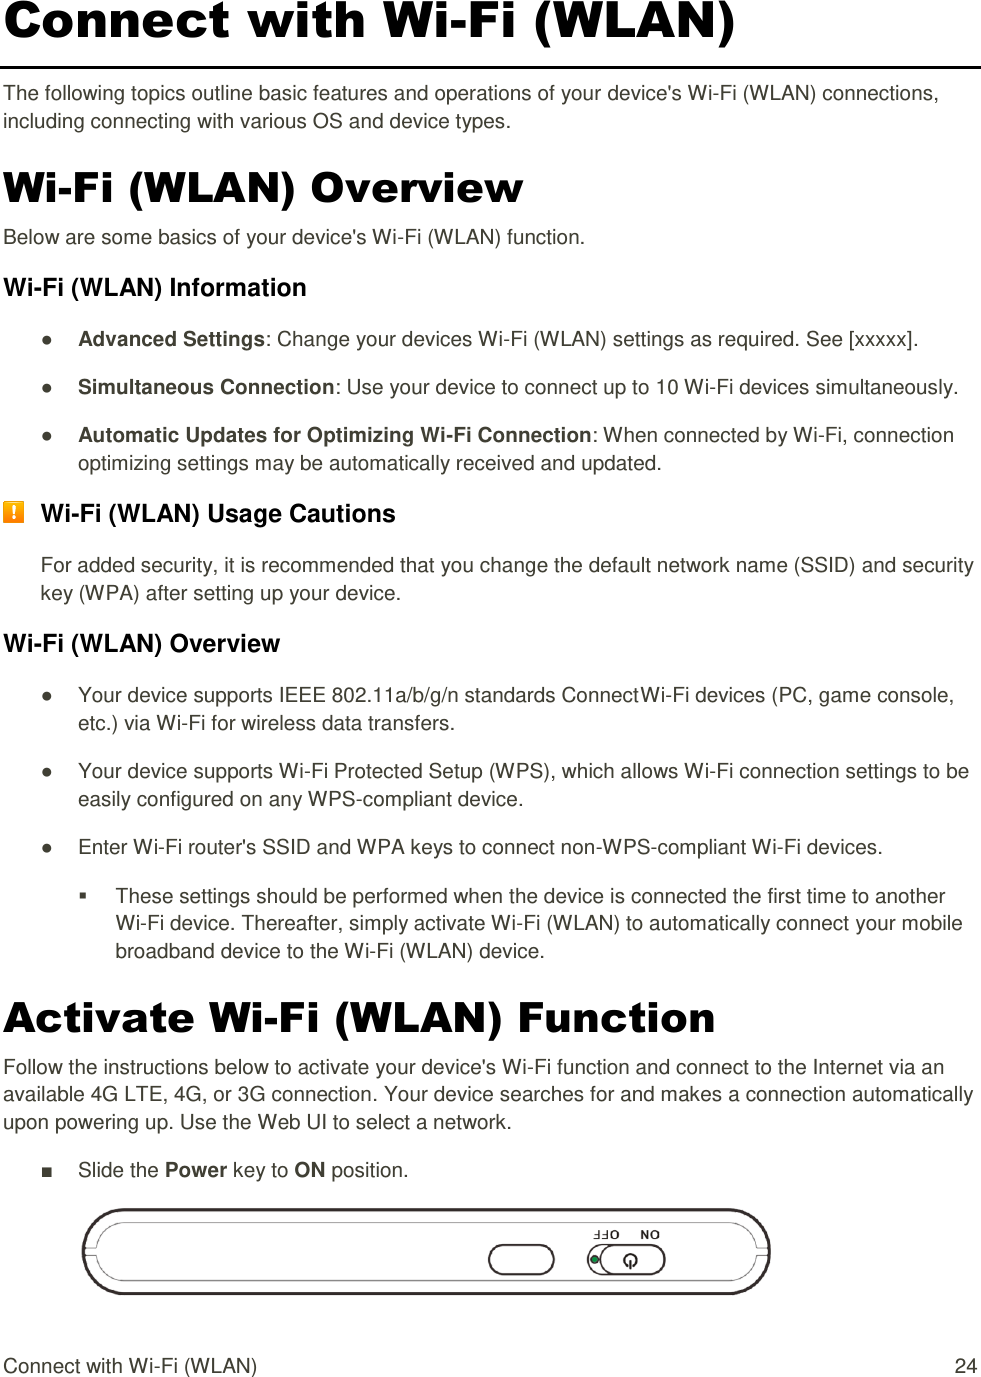 Connect with Wi-Fi (WLAN)  24 Connect with Wi-Fi (WLAN) The following topics outline basic features and operations of your device&apos;s Wi-Fi (WLAN) connections, including connecting with various OS and device types. Wi-Fi (WLAN) Overview Below are some basics of your device&apos;s Wi-Fi (WLAN) function. Wi-Fi (WLAN) Information ● Advanced Settings: Change your devices Wi-Fi (WLAN) settings as required. See [xxxxx]. ● Simultaneous Connection: Use your device to connect up to 10 Wi-Fi devices simultaneously.  ● Automatic Updates for Optimizing Wi-Fi Connection: When connected by Wi-Fi, connection optimizing settings may be automatically received and updated.  Wi-Fi (WLAN) Usage Cautions For added security, it is recommended that you change the default network name (SSID) and security key (WPA) after setting up your device. Wi-Fi (WLAN) Overview  ●  Your device supports IEEE 802.11a/b/g/n standards Connect Wi-Fi devices (PC, game console, etc.) via Wi-Fi for wireless data transfers. ●  Your device supports Wi-Fi Protected Setup (WPS), which allows Wi-Fi connection settings to be easily configured on any WPS-compliant device. ●  Enter Wi-Fi router&apos;s SSID and WPA keys to connect non-WPS-compliant Wi-Fi devices.   These settings should be performed when the device is connected the first time to another Wi-Fi device. Thereafter, simply activate Wi-Fi (WLAN) to automatically connect your mobile broadband device to the Wi-Fi (WLAN) device.  Activate Wi-Fi (WLAN) Function Follow the instructions below to activate your device&apos;s Wi-Fi function and connect to the Internet via an available 4G LTE, 4G, or 3G connection. Your device searches for and makes a connection automatically upon powering up. Use the Web UI to select a network. ■  Slide the Power key to ON position.  